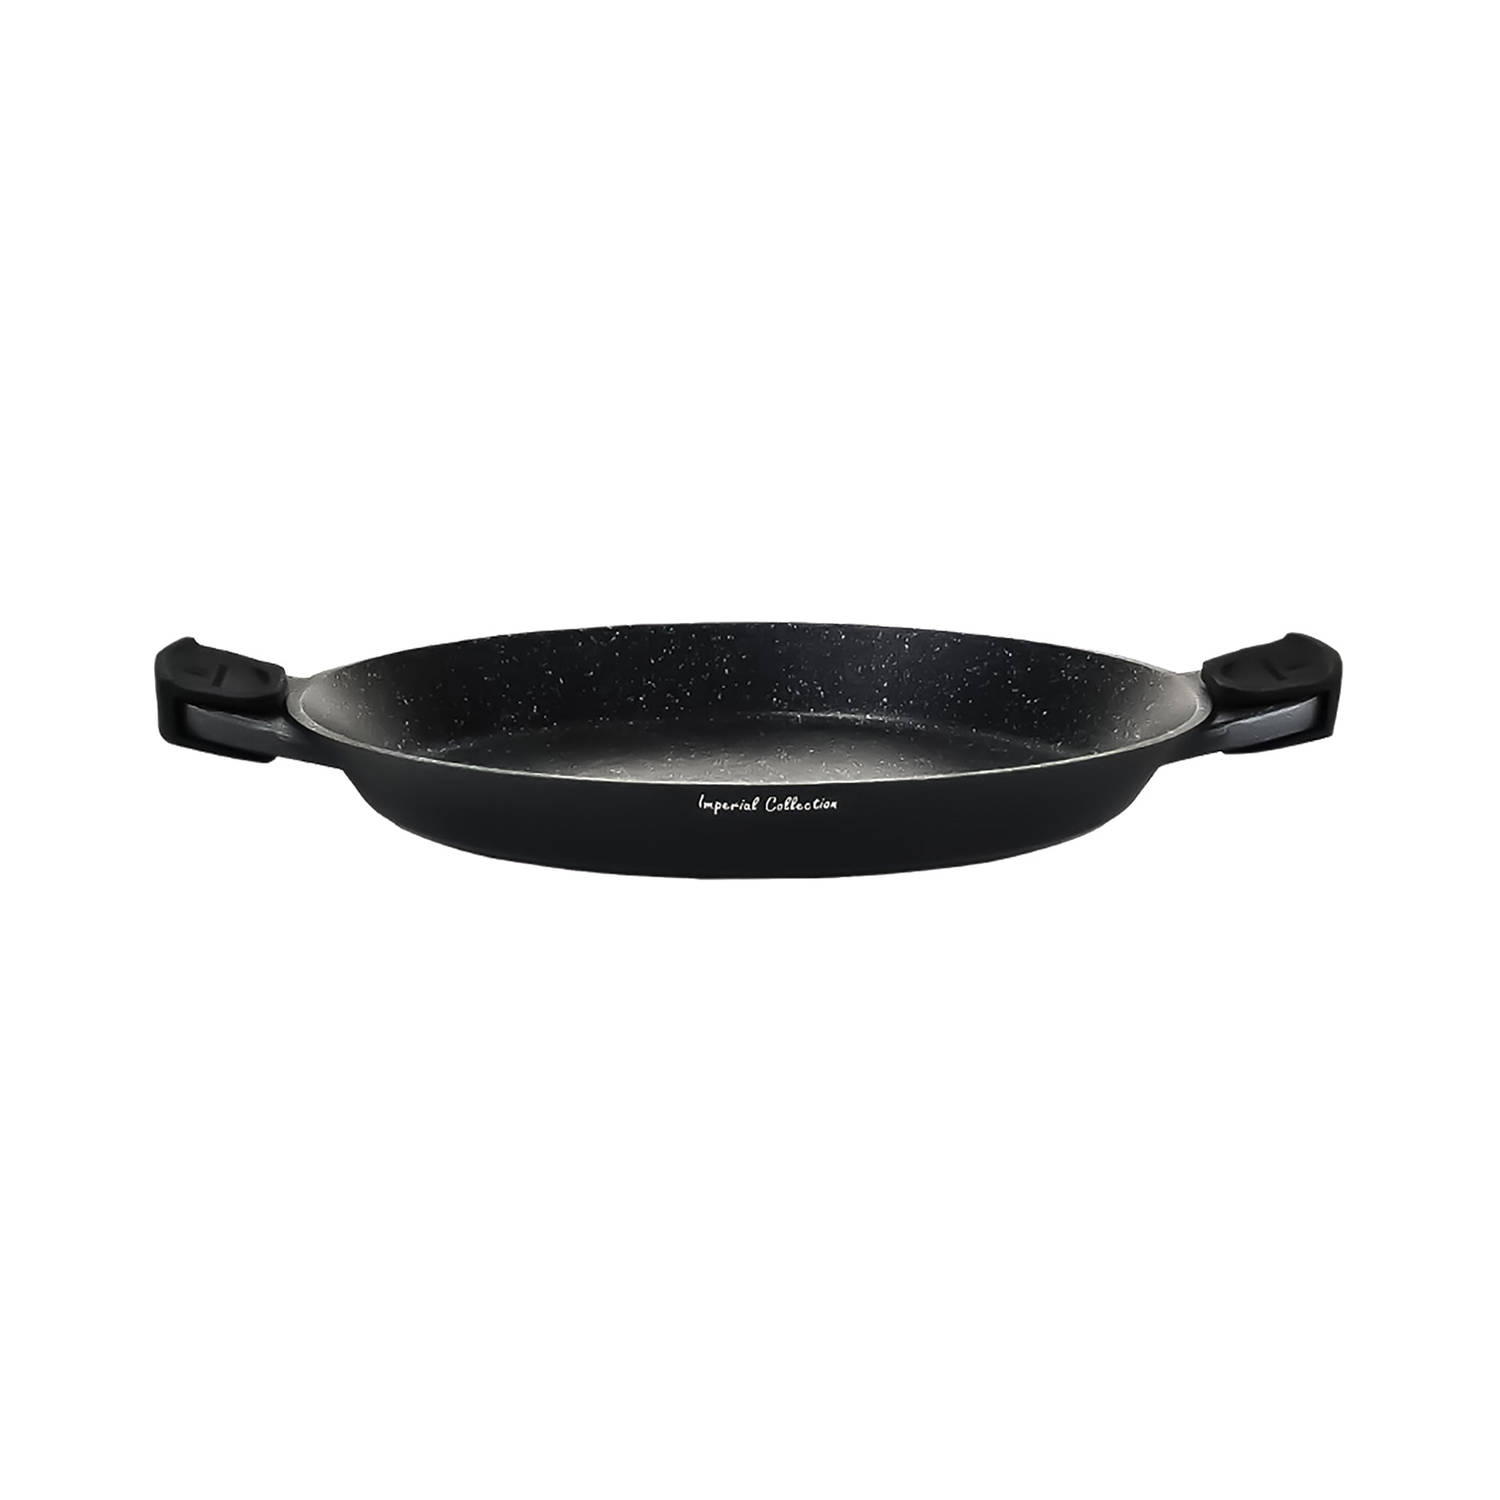 Imperial Collection 36cm Paella Pan with Silicone Handles